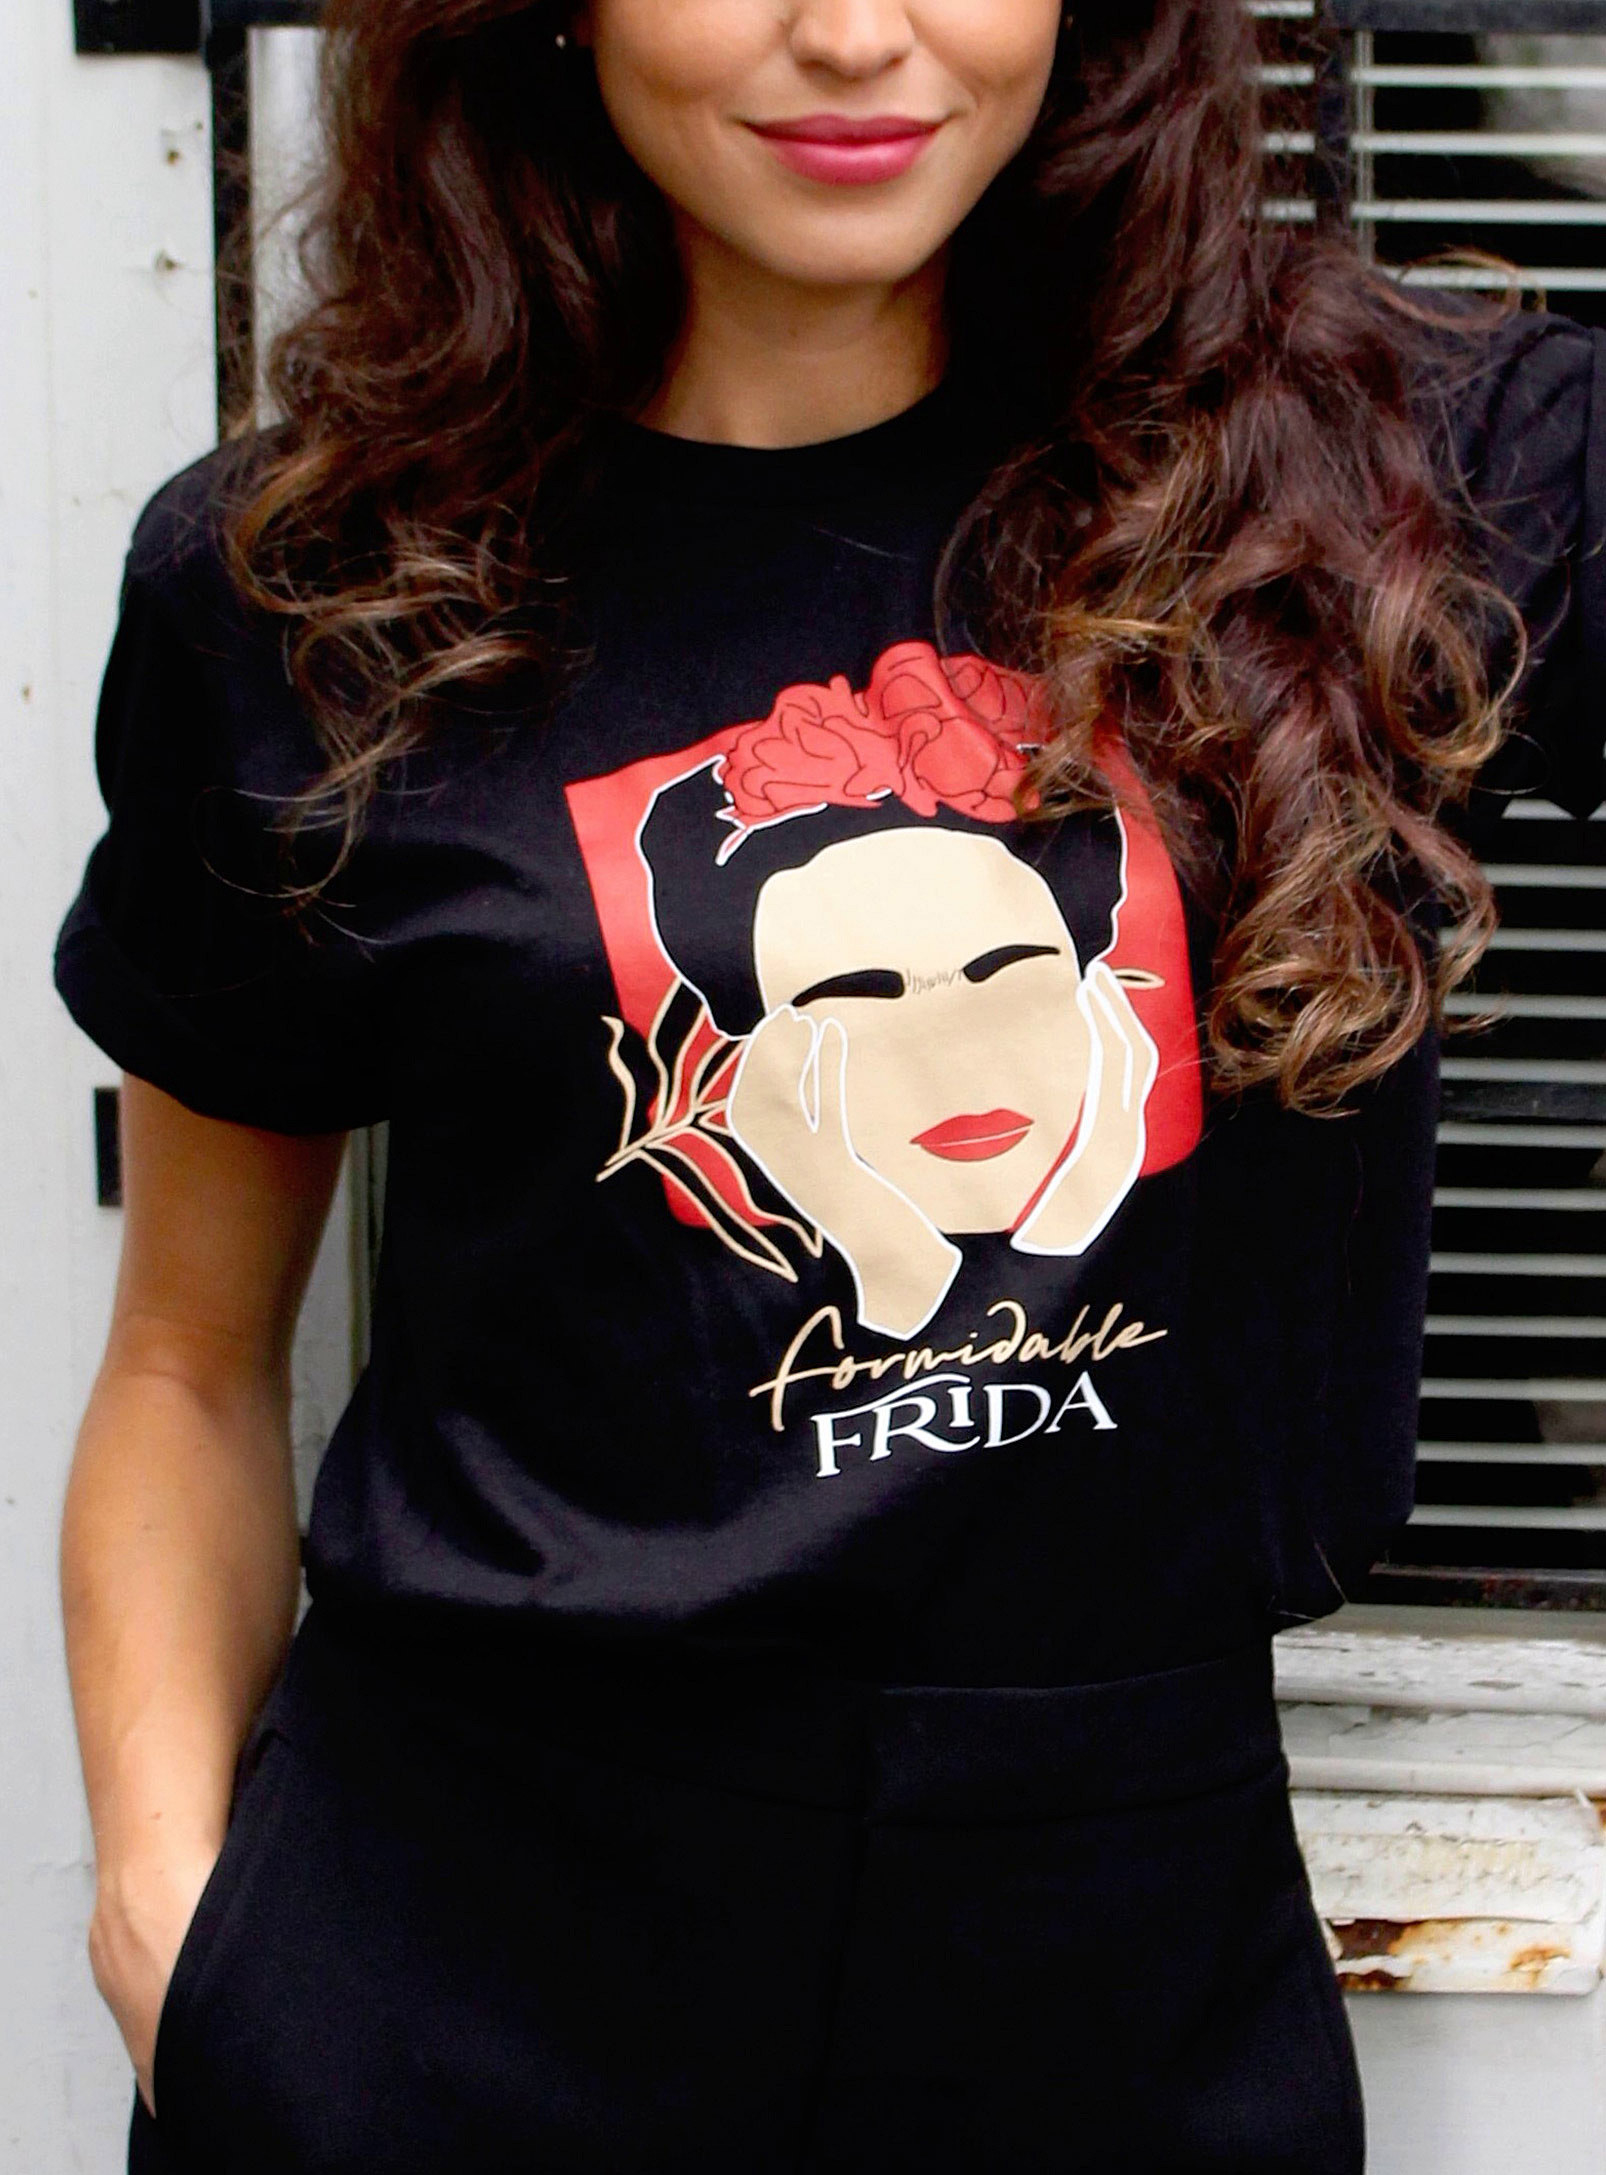 A person wearing a graphic T-shirt with an illustration of Frida Kahlo